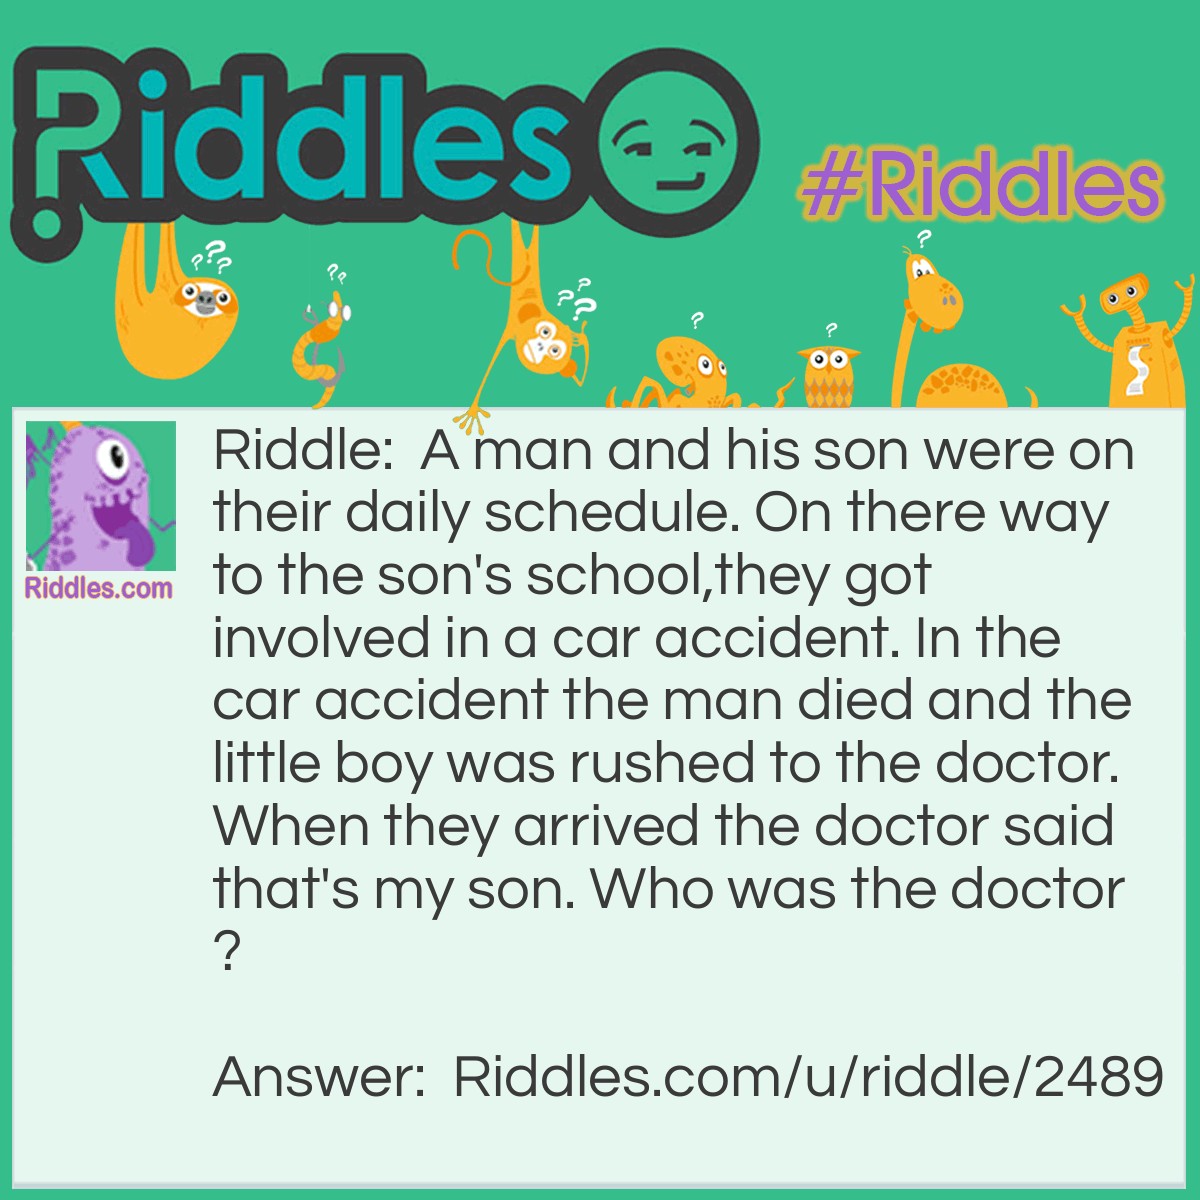 Riddle: A man and his son were on their daily schedule. On there way to the son's school,they got involved in a car accident. In the car accident the man died and the little boy was rushed to the doctor. When they arrived the doctor said that's my son. Who was the doctor? Answer: The mother.